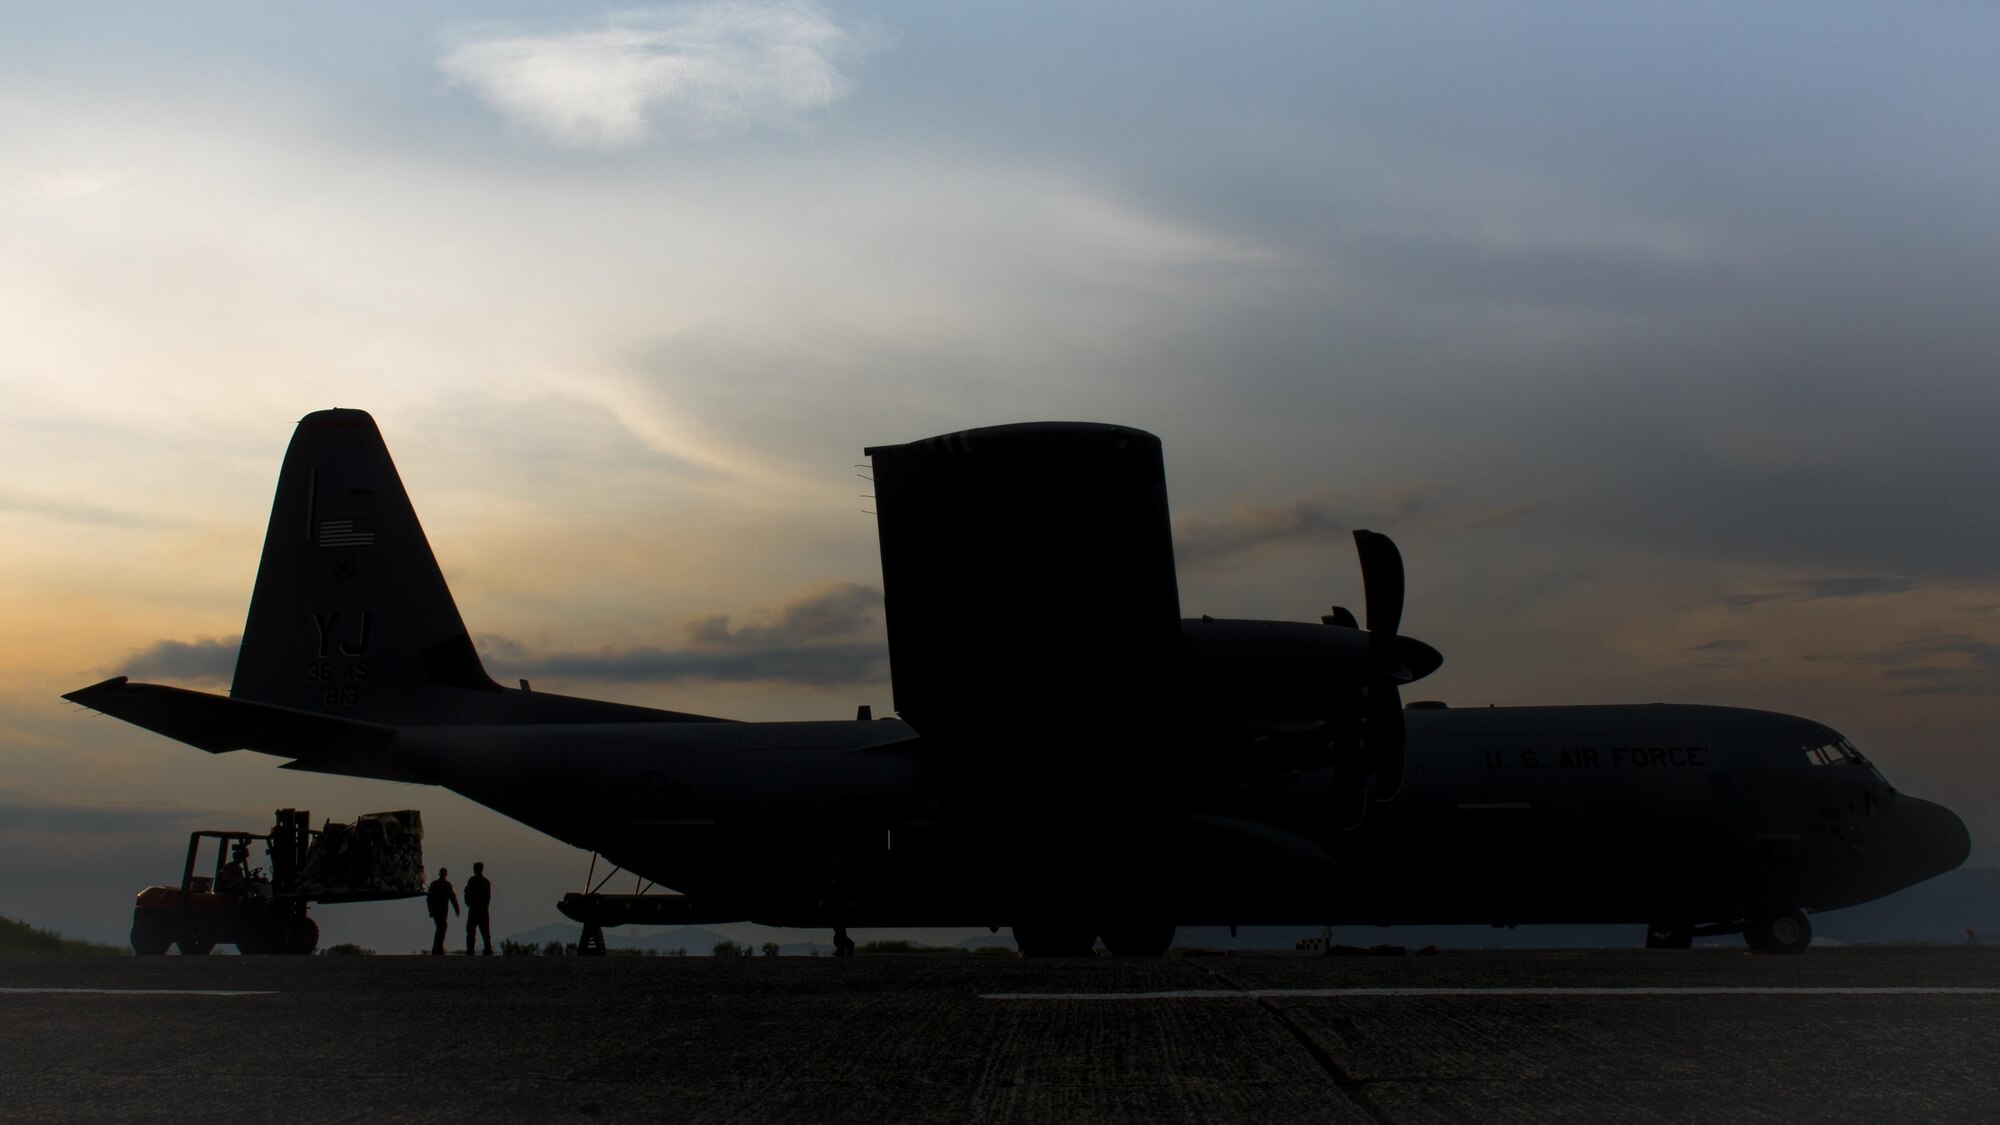 Airmen assigned to the 374th Airlift Wing at Yokota Air Base, Japan, load cargo on to a C-130J Super Hercules during Yokota’s first C-130J operational mission, June 30, 2017, at Manila, Philippines. The mission highlighted Yokota’s C-130J increased airlift capabilities. (U.S. Air Force photo by Airman 1st Class Juan Torres)